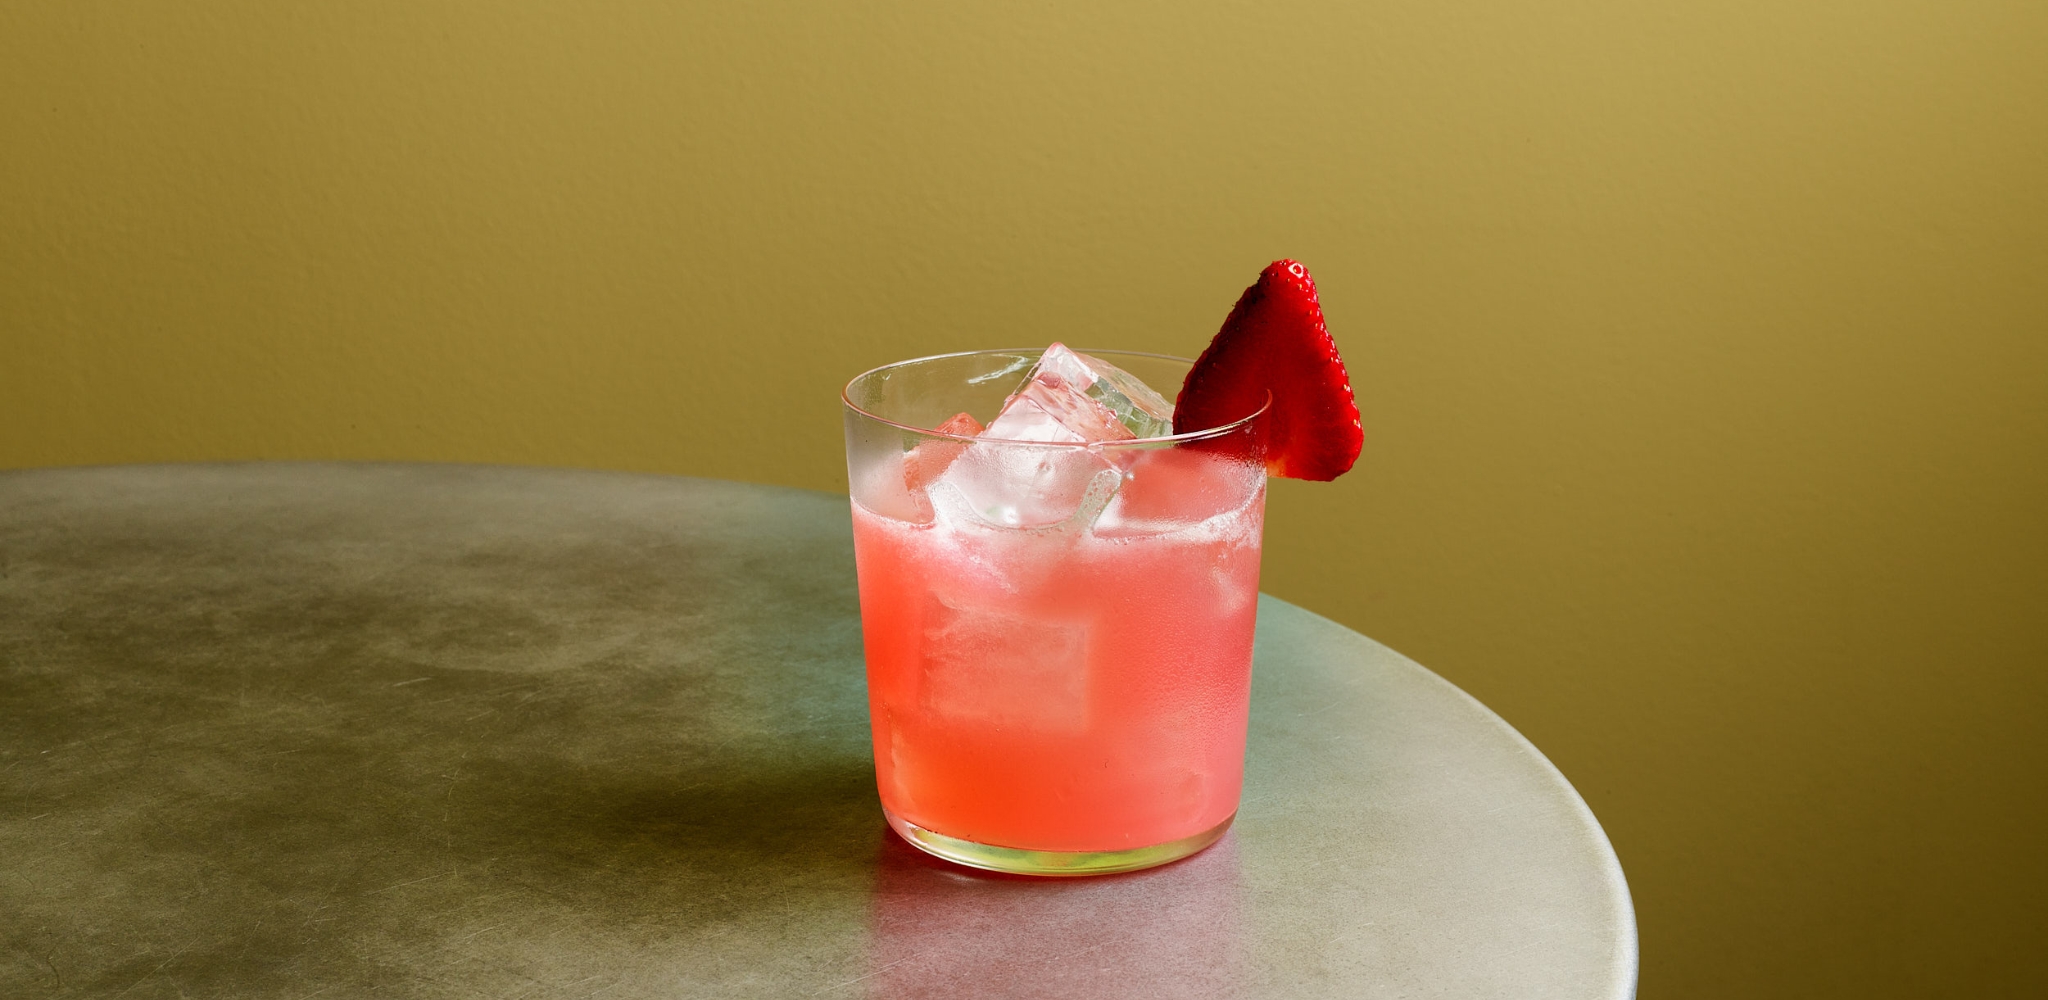 Image of the Jacksons Margarita with Casamigos Blanco, Cointreau, strawberry gum, fresh lime and fresh strawberry.